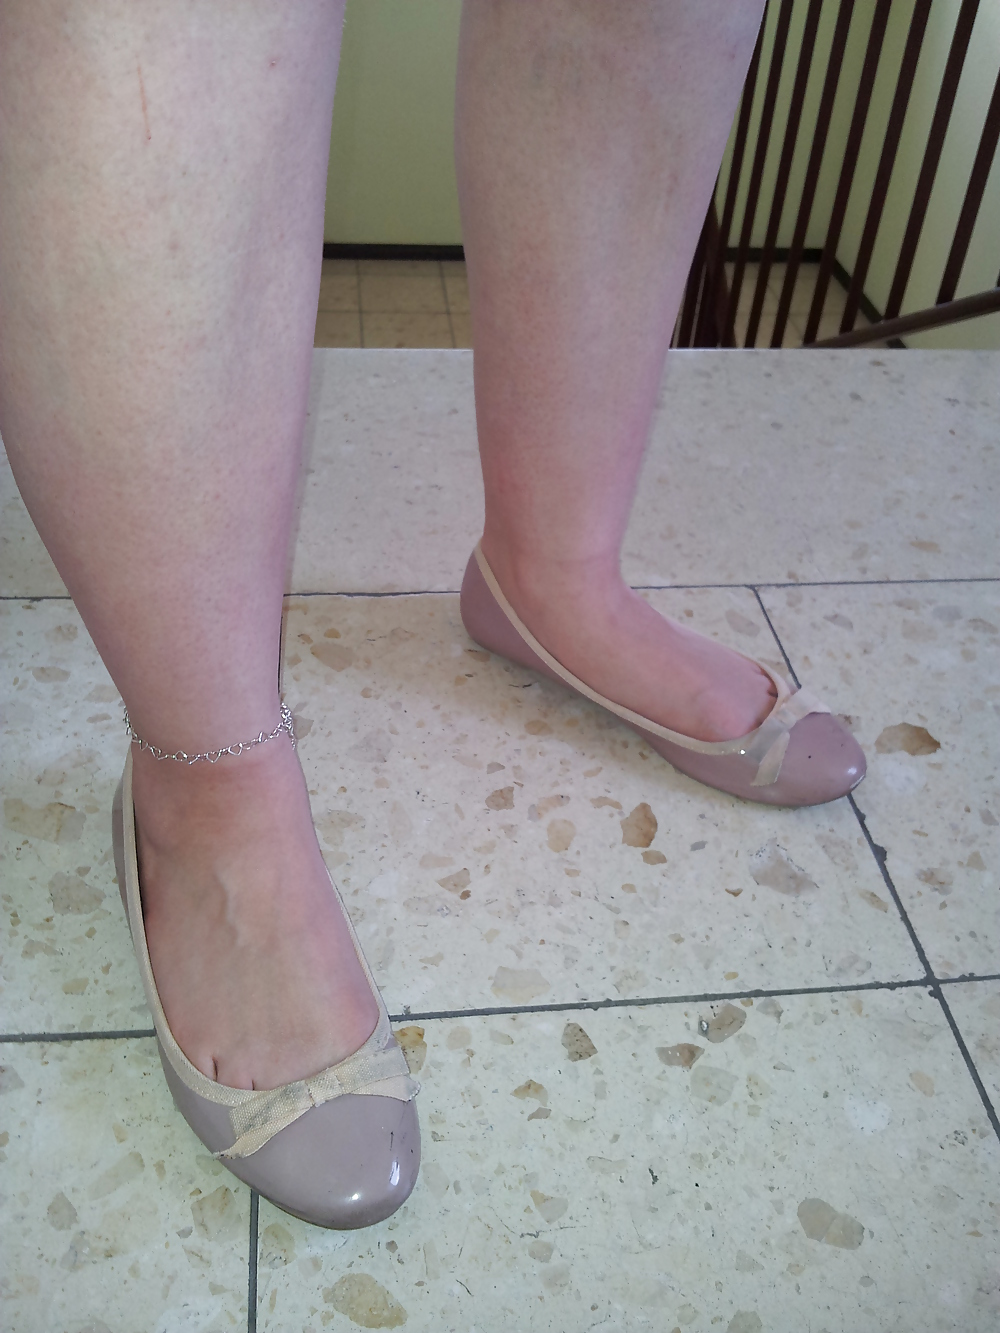 Wifes well worn nude lack Ballerinas flats shoes3 #19058989